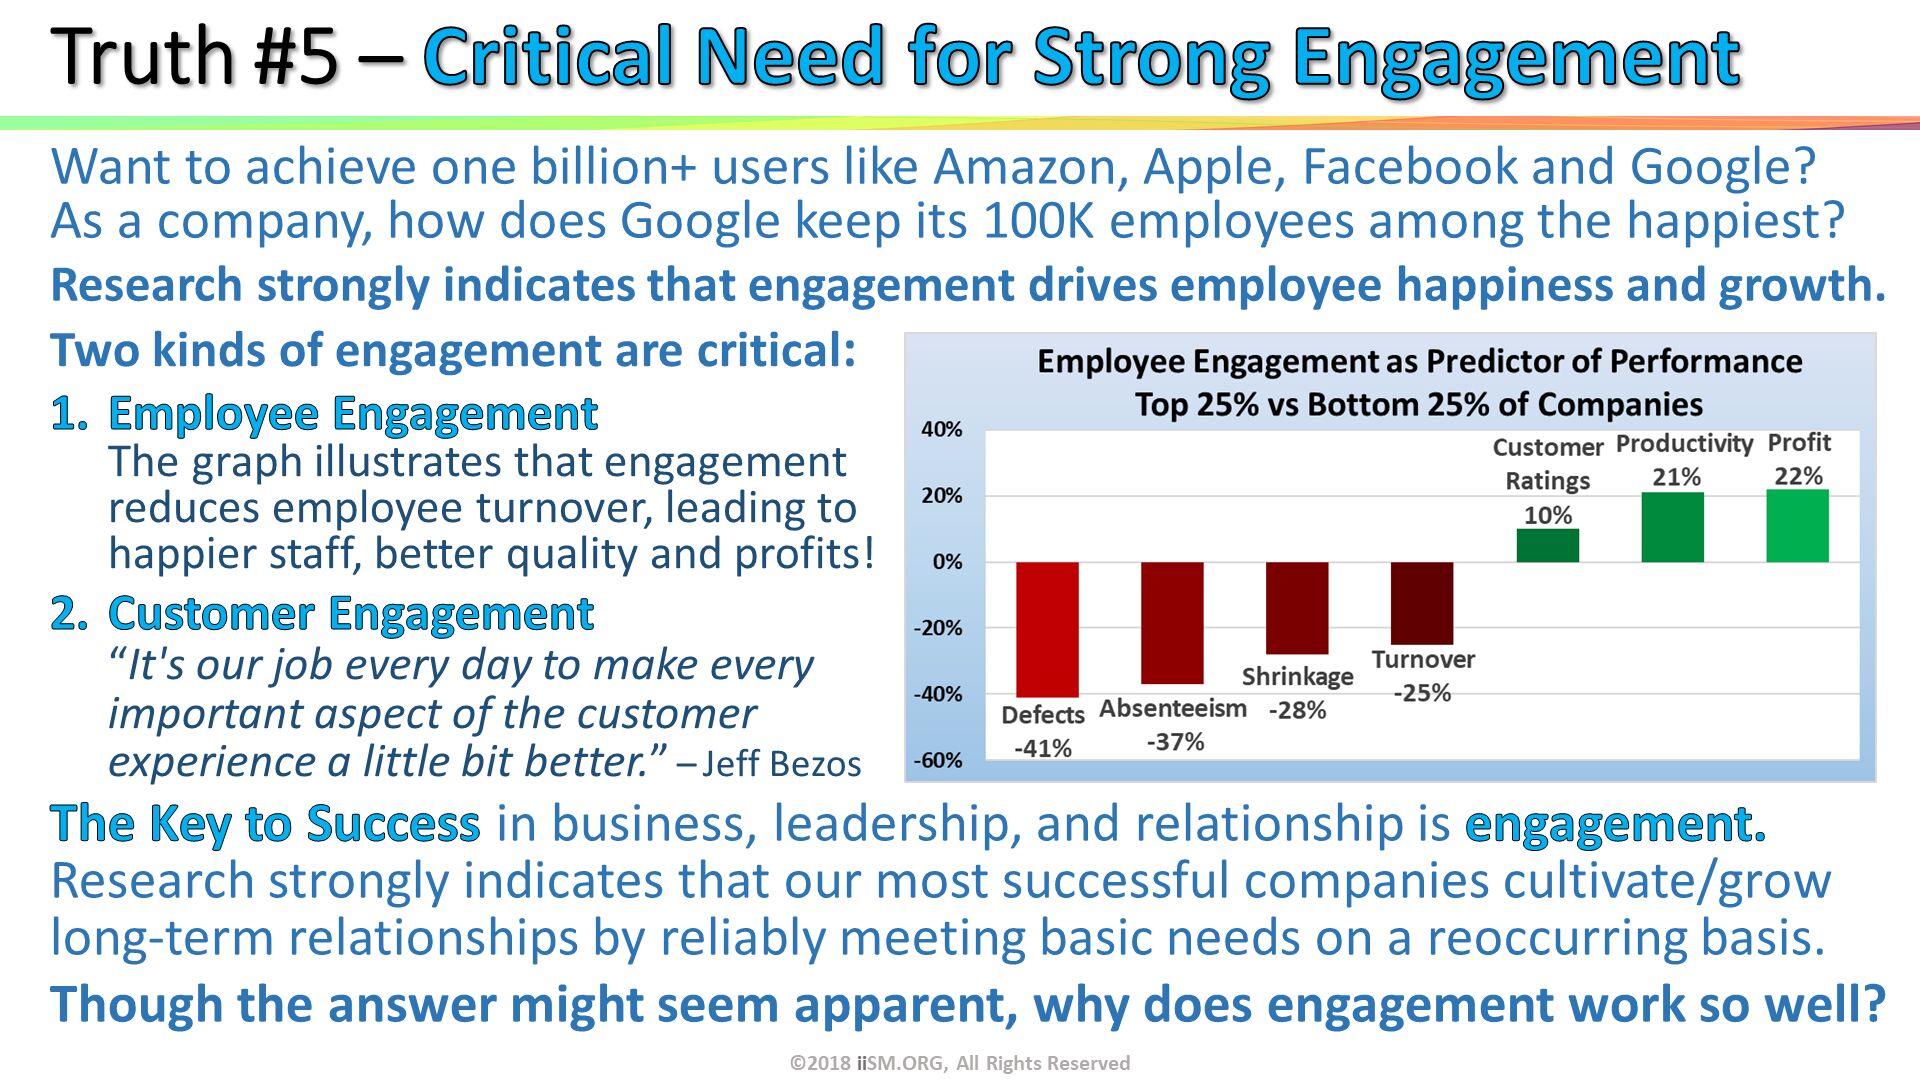 Truth #5 – Critical Need for Strong Engagement . ©2018 iiSM.ORG, All Rights Reserved. 
. Want to achieve one billion+ users like Amazon, Apple, Facebook and Google?As a company, how does Google keep its 100K employees among the happiest?
Research strongly indicates that engagement drives employee happiness and growth. The Key to Success in business, leadership, and relationship is engagement.  Research strongly indicates that our most successful companies cultivate/grow long-term relationships by reliably meeting basic needs on a reoccurring basis.
Though the answer might seem apparent, why does engagement work so well? 
. Two kinds of engagement are critical:
Employee EngagementThe graph illustrates that engagement reduces employee turnover, leading to happier staff, better quality and profits! 
Customer Engagement
“It's our job every day to make every important aspect of the customer experience a little bit better.” – Jeff Bezos. 